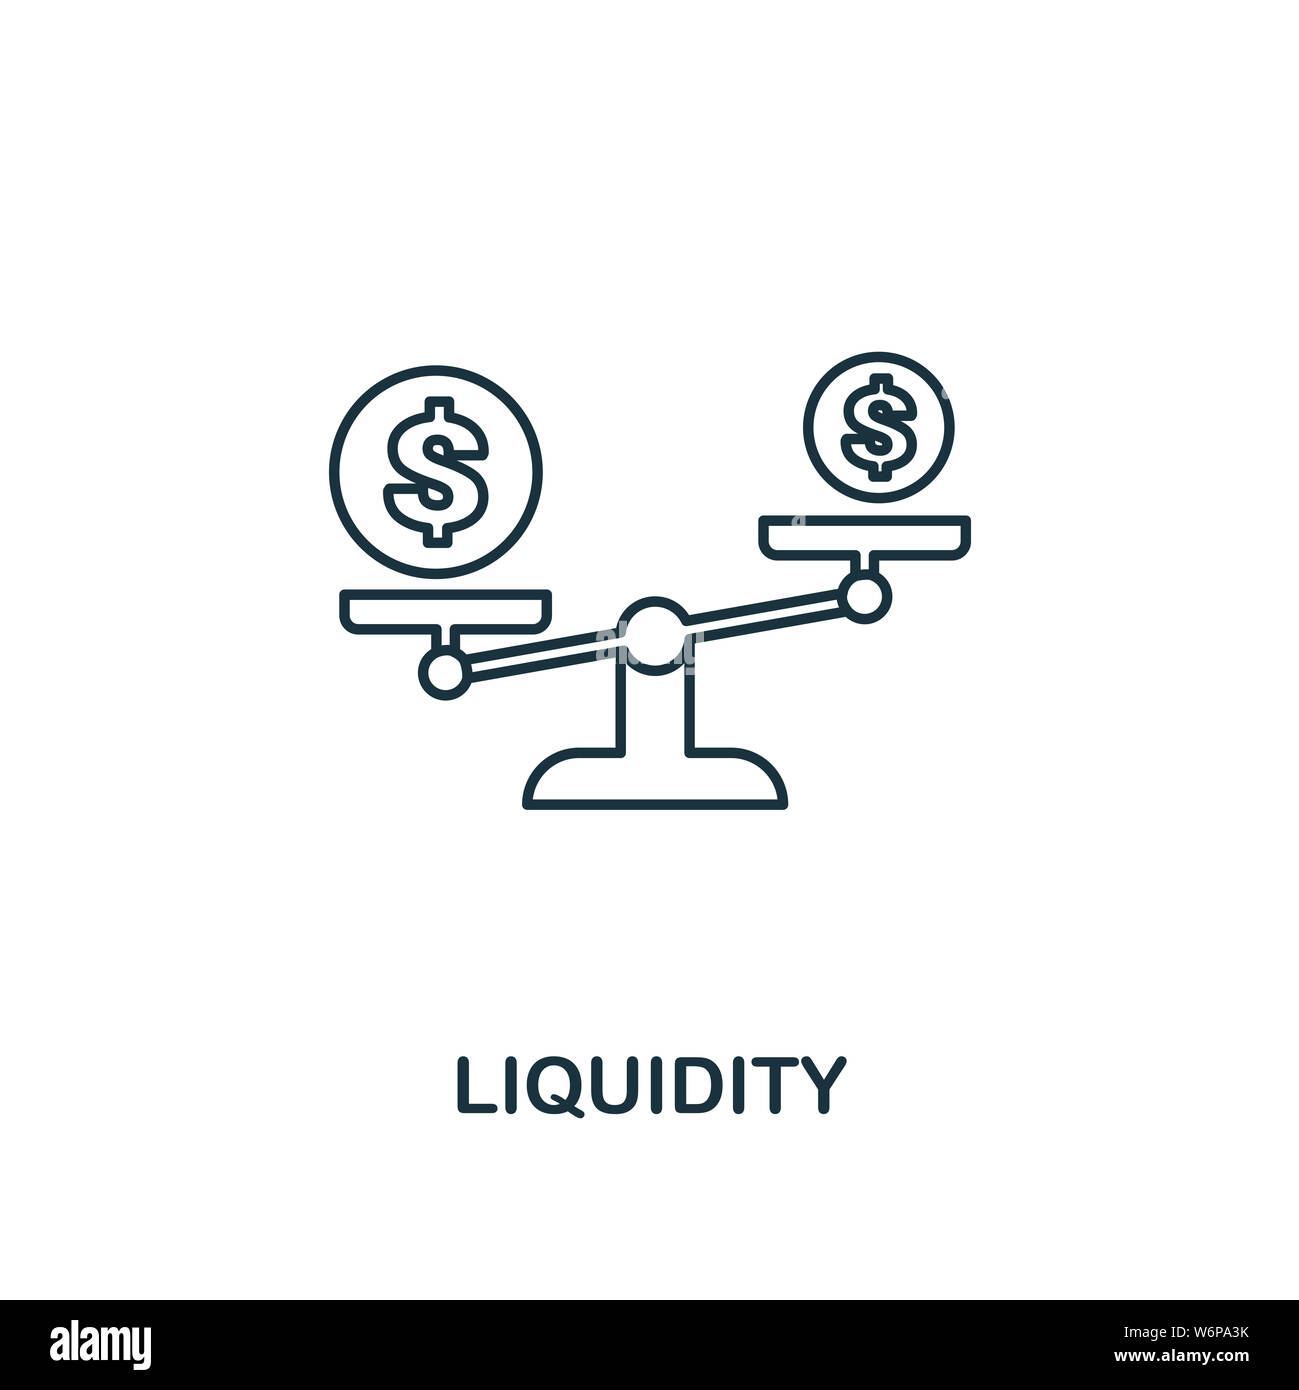 Liquidity outline icon. Thin line element from crowdfunding icons collection. UI and UX. Pixel perfect liquidity icon for web design, apps, software Stock Photo